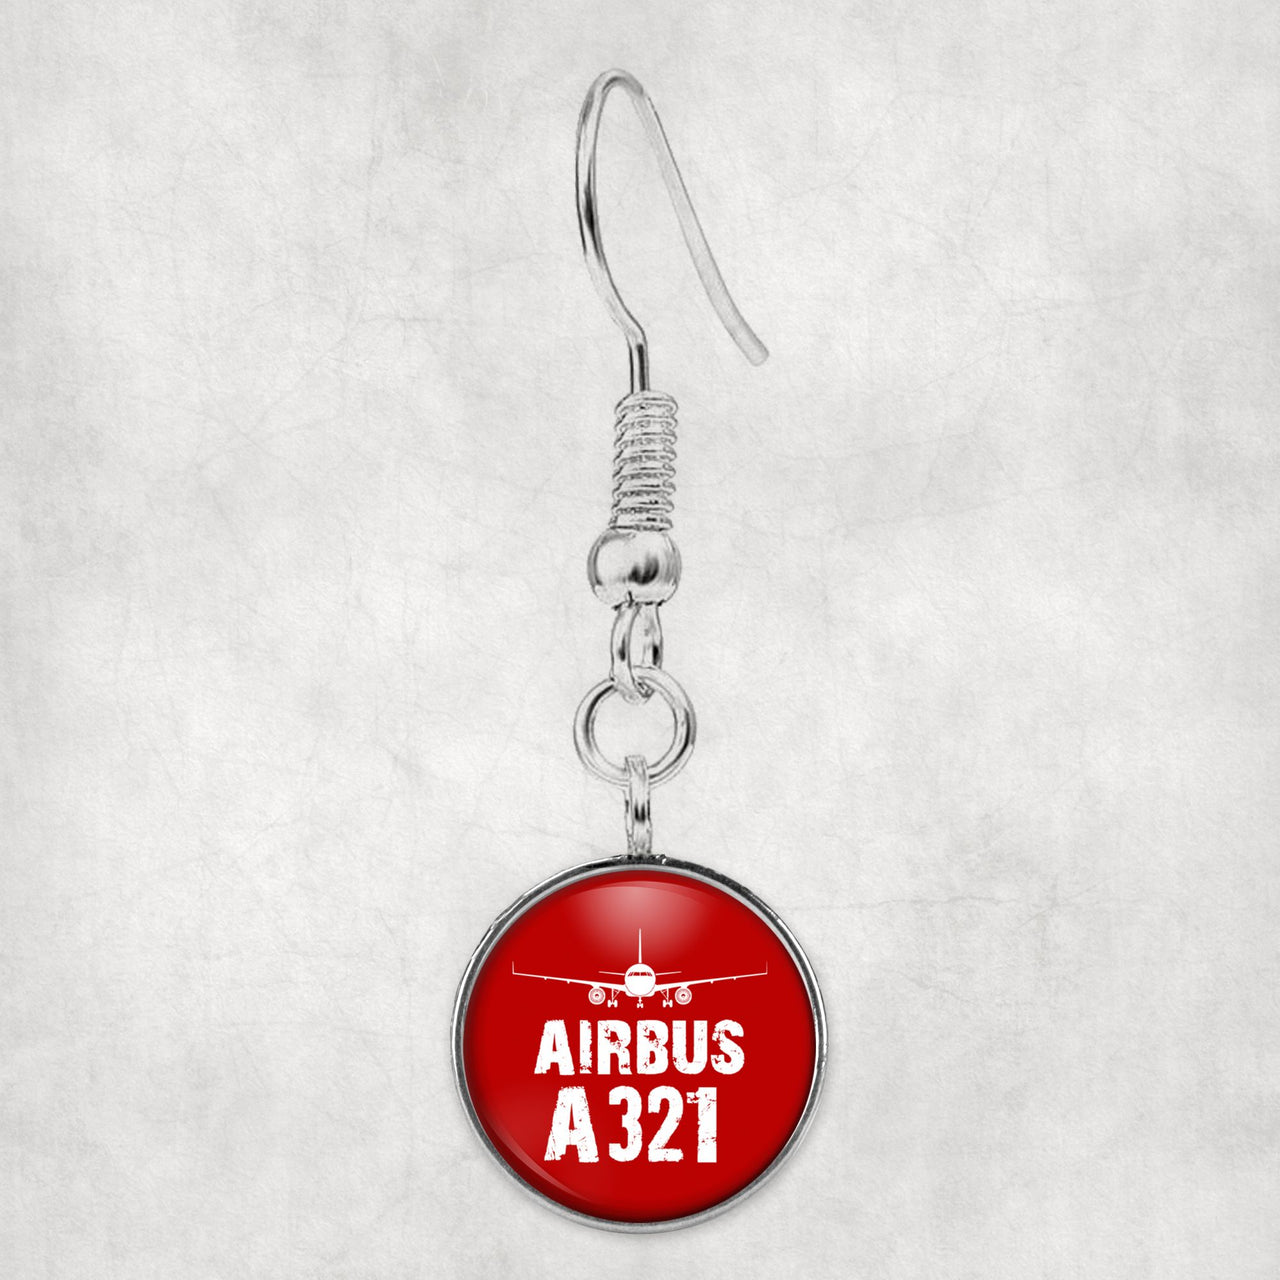 Airbus A321 & Plane Designed Earrings